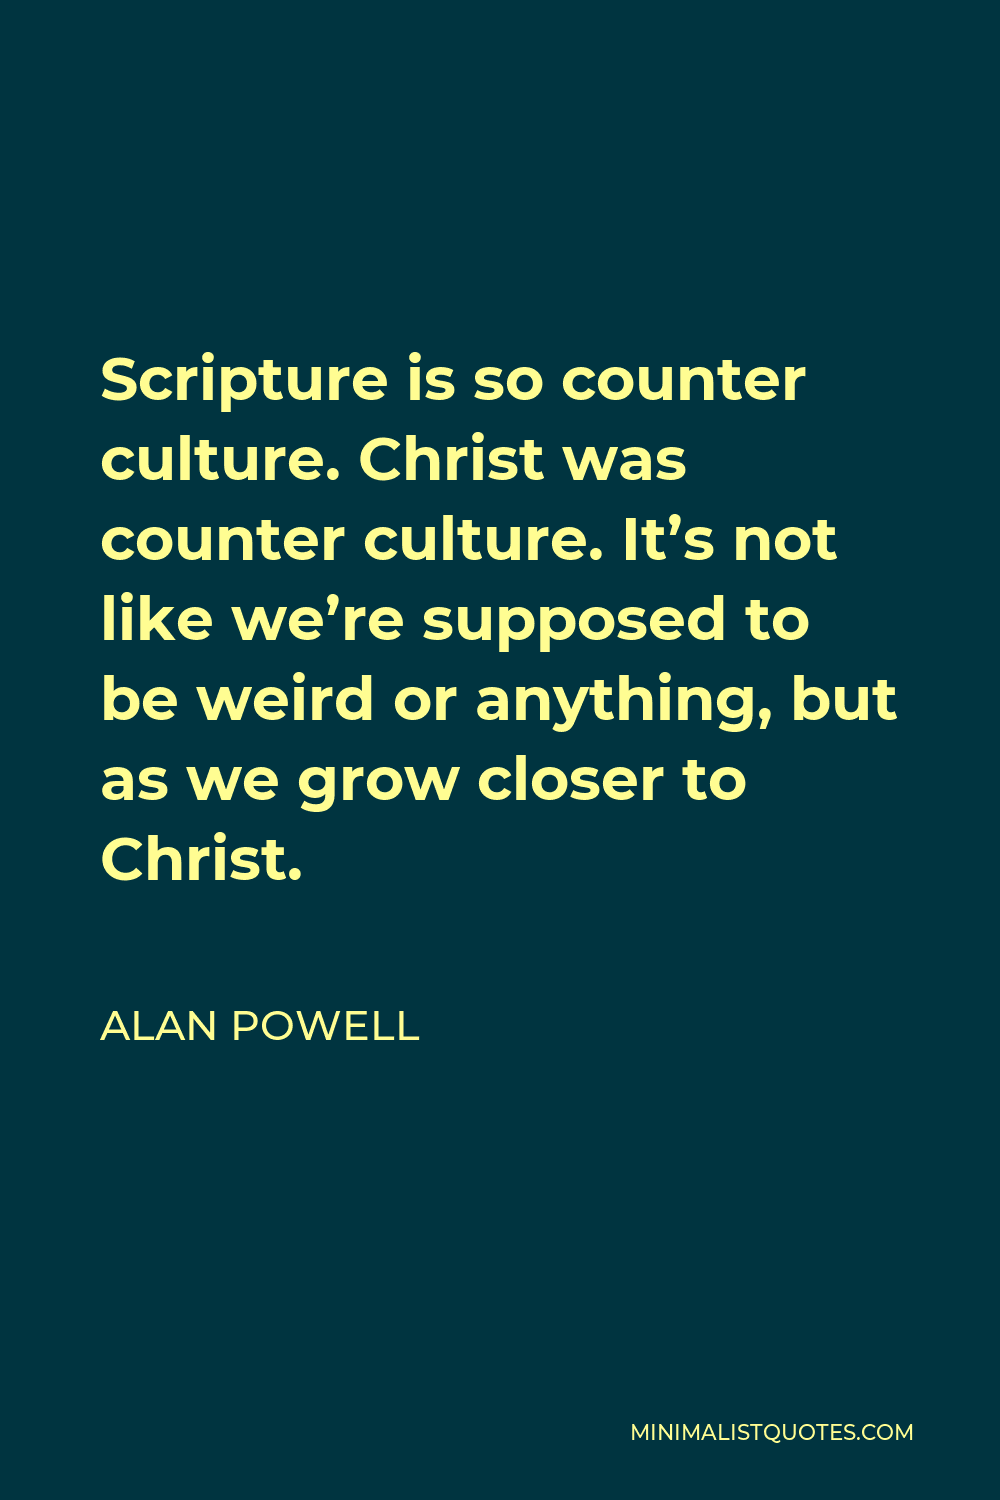 Alan Powell Quote - Scripture is so counter culture. Christ was counter culture. It’s not like we’re supposed to be weird or anything, but as we grow closer to Christ.